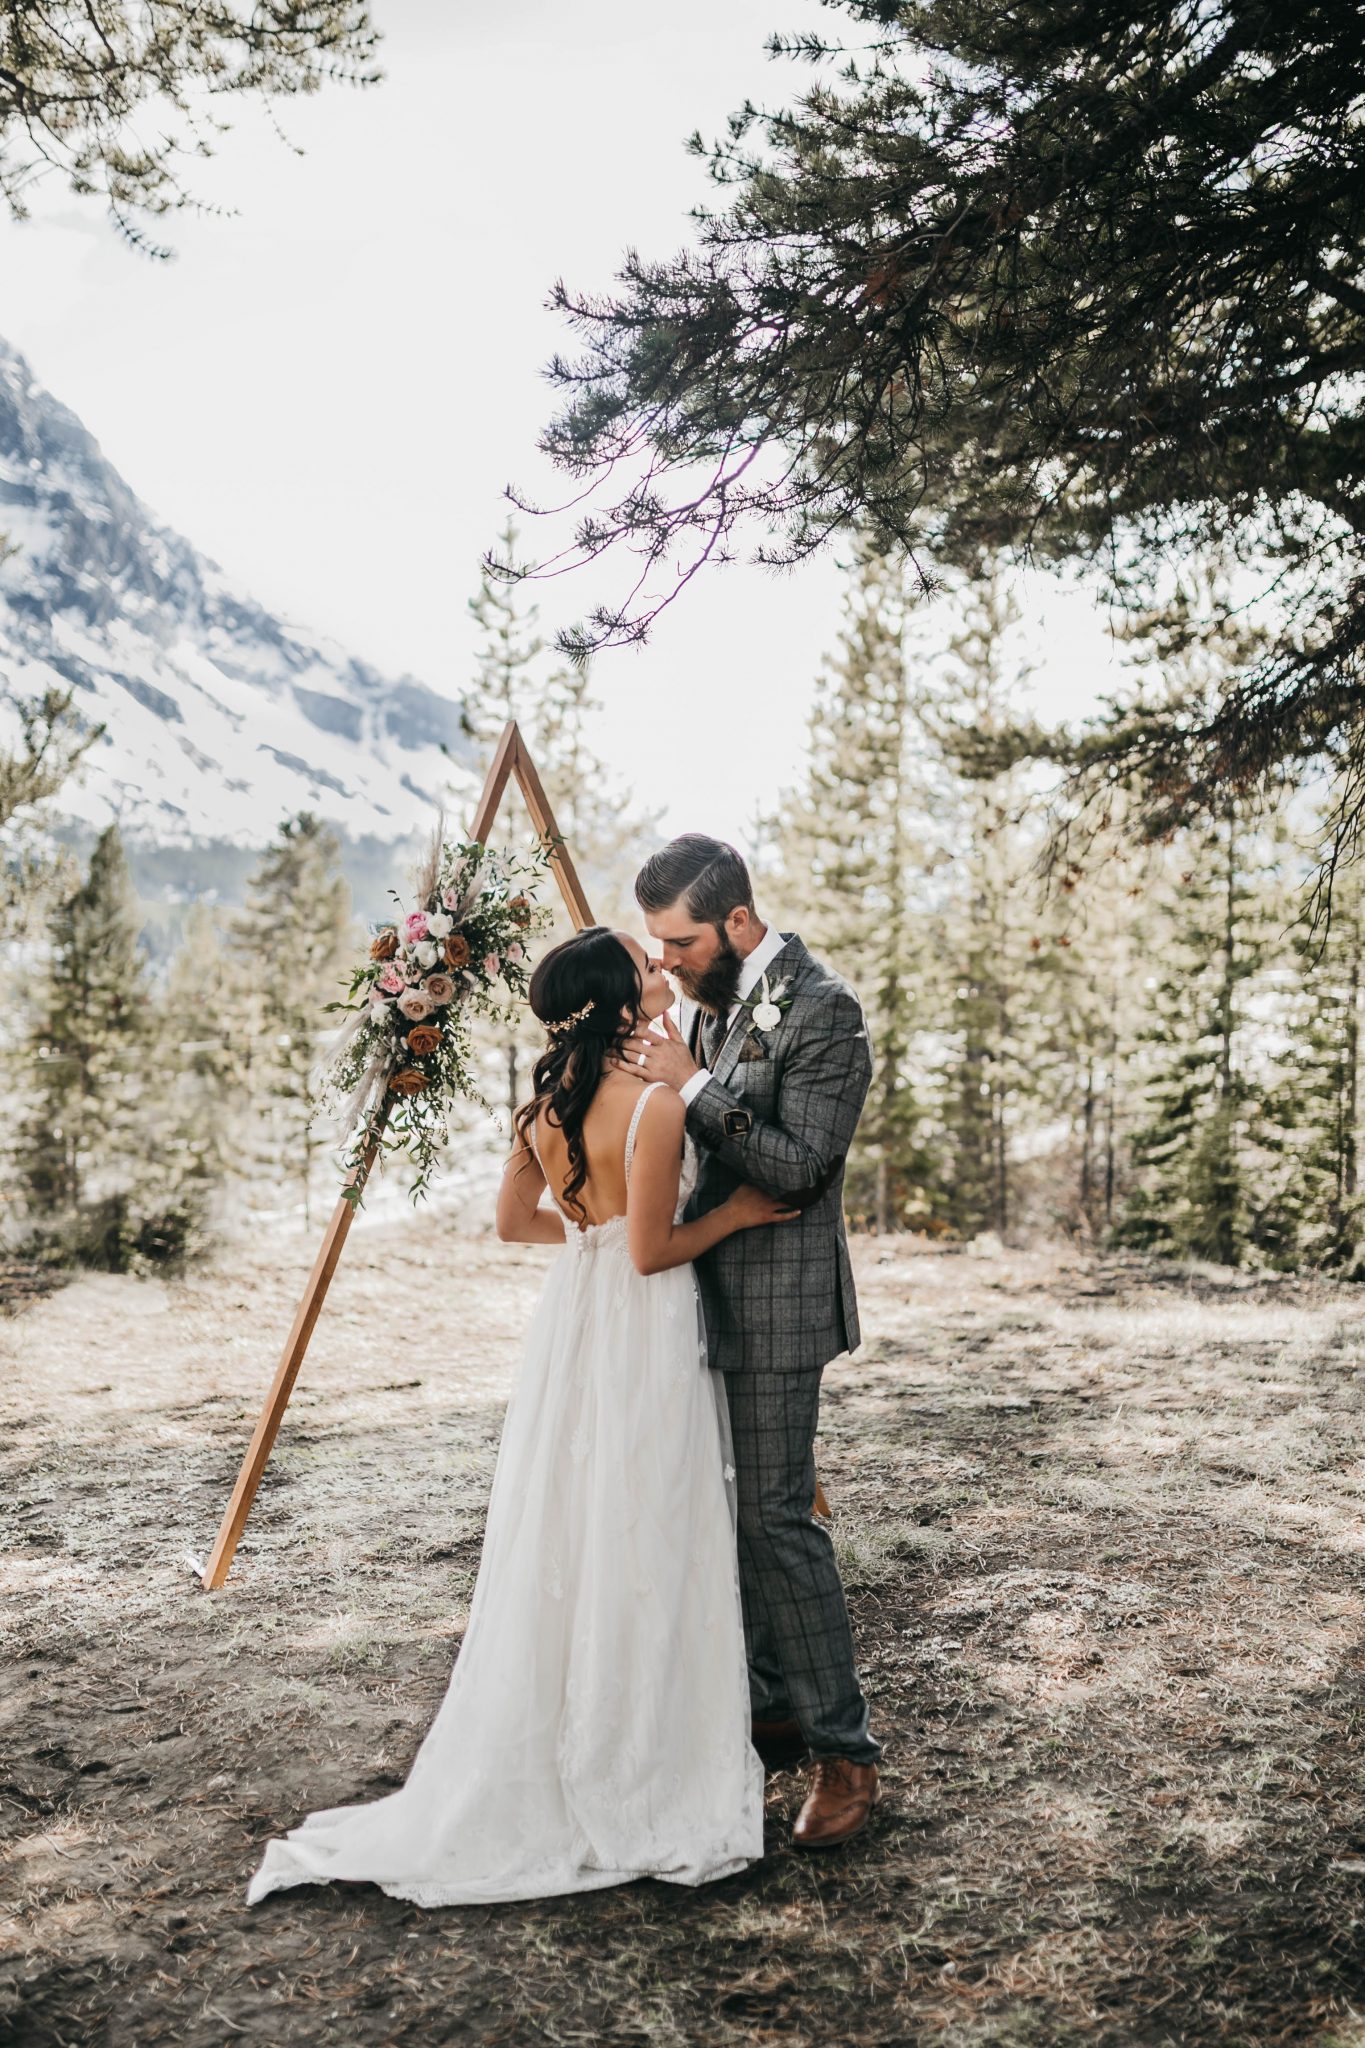 Bride and groom pose in front of a triangle arch in the mountains